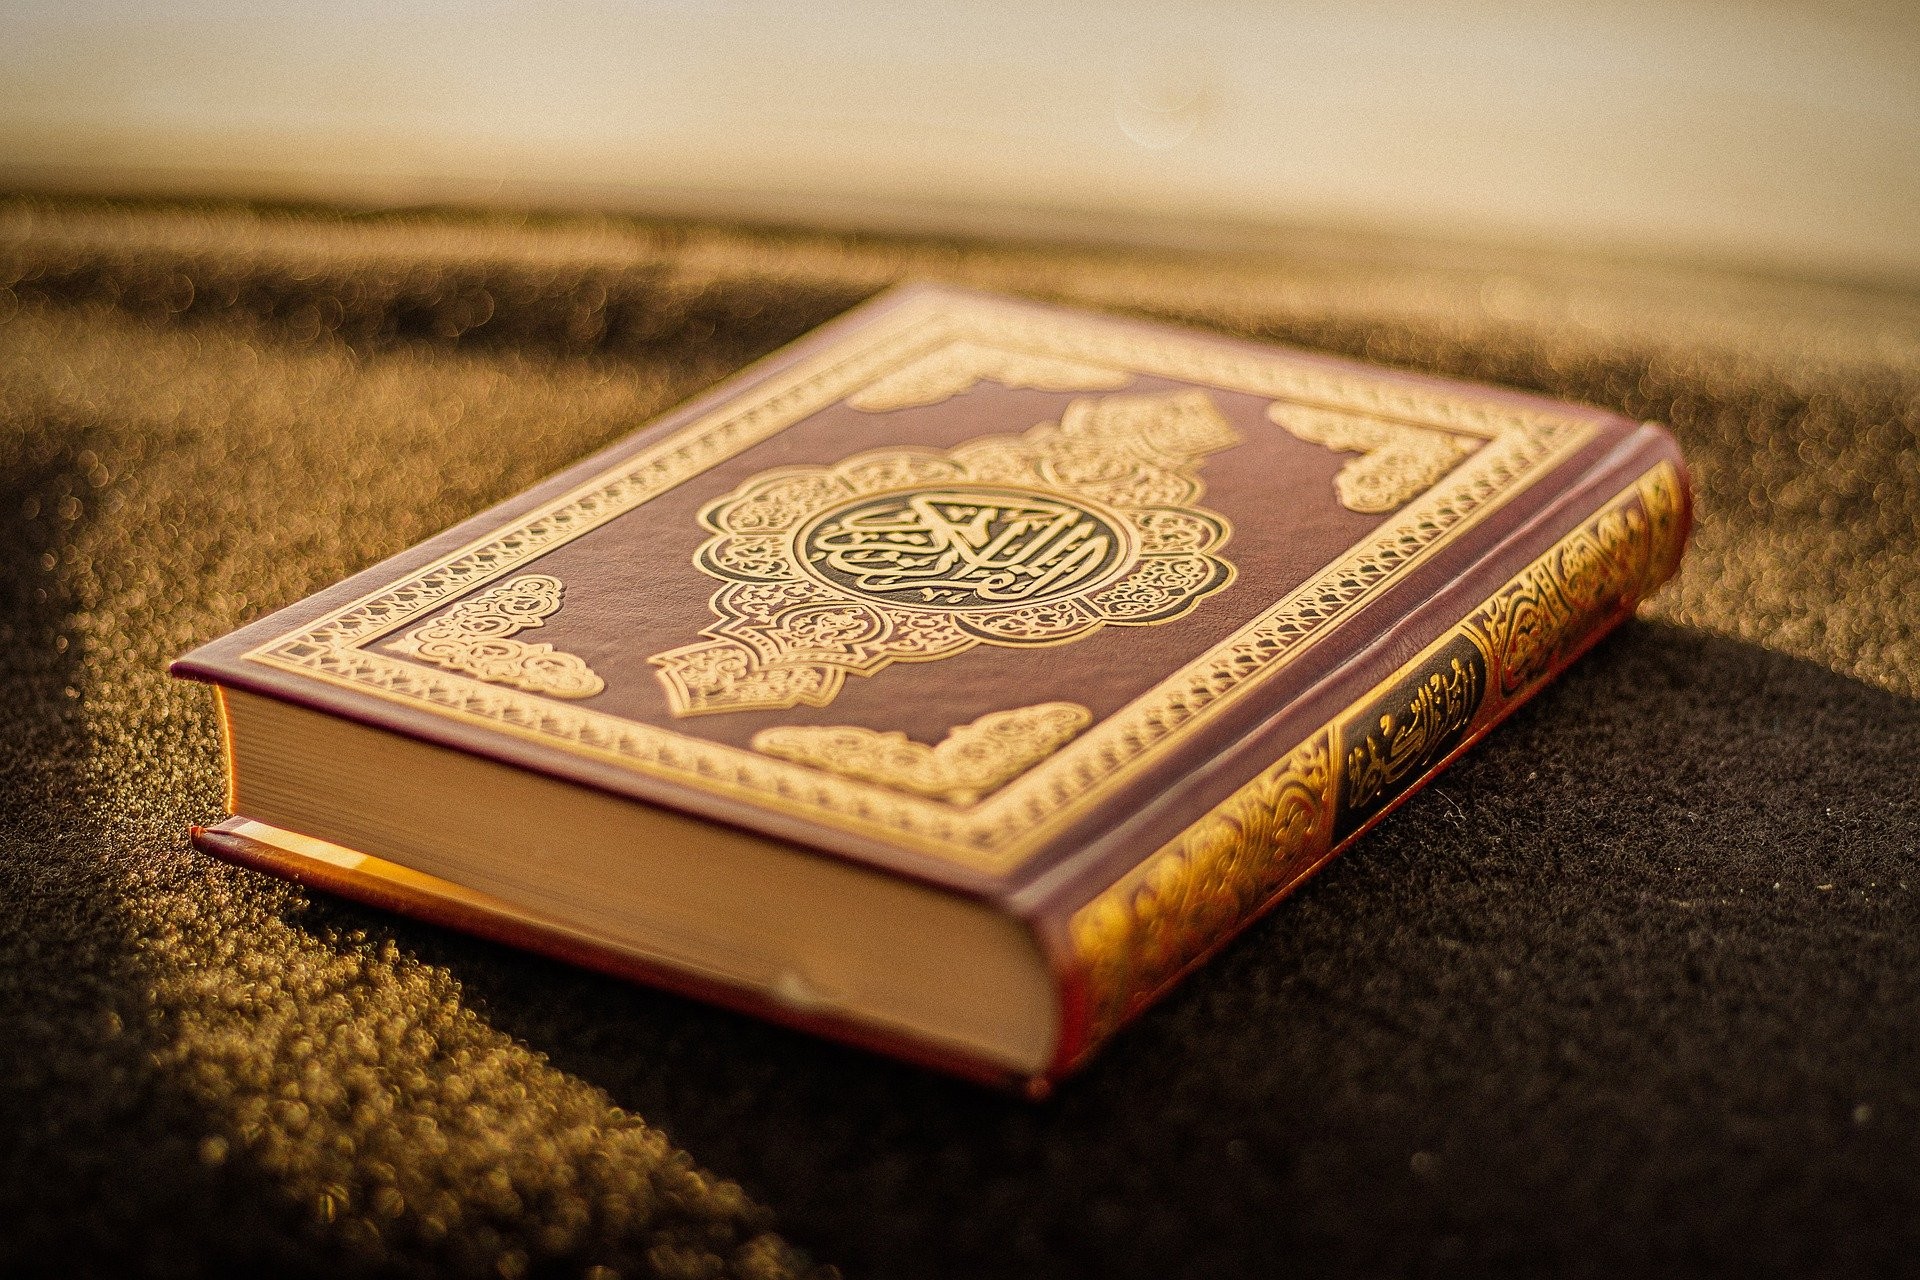 Challenge of the Qur'an